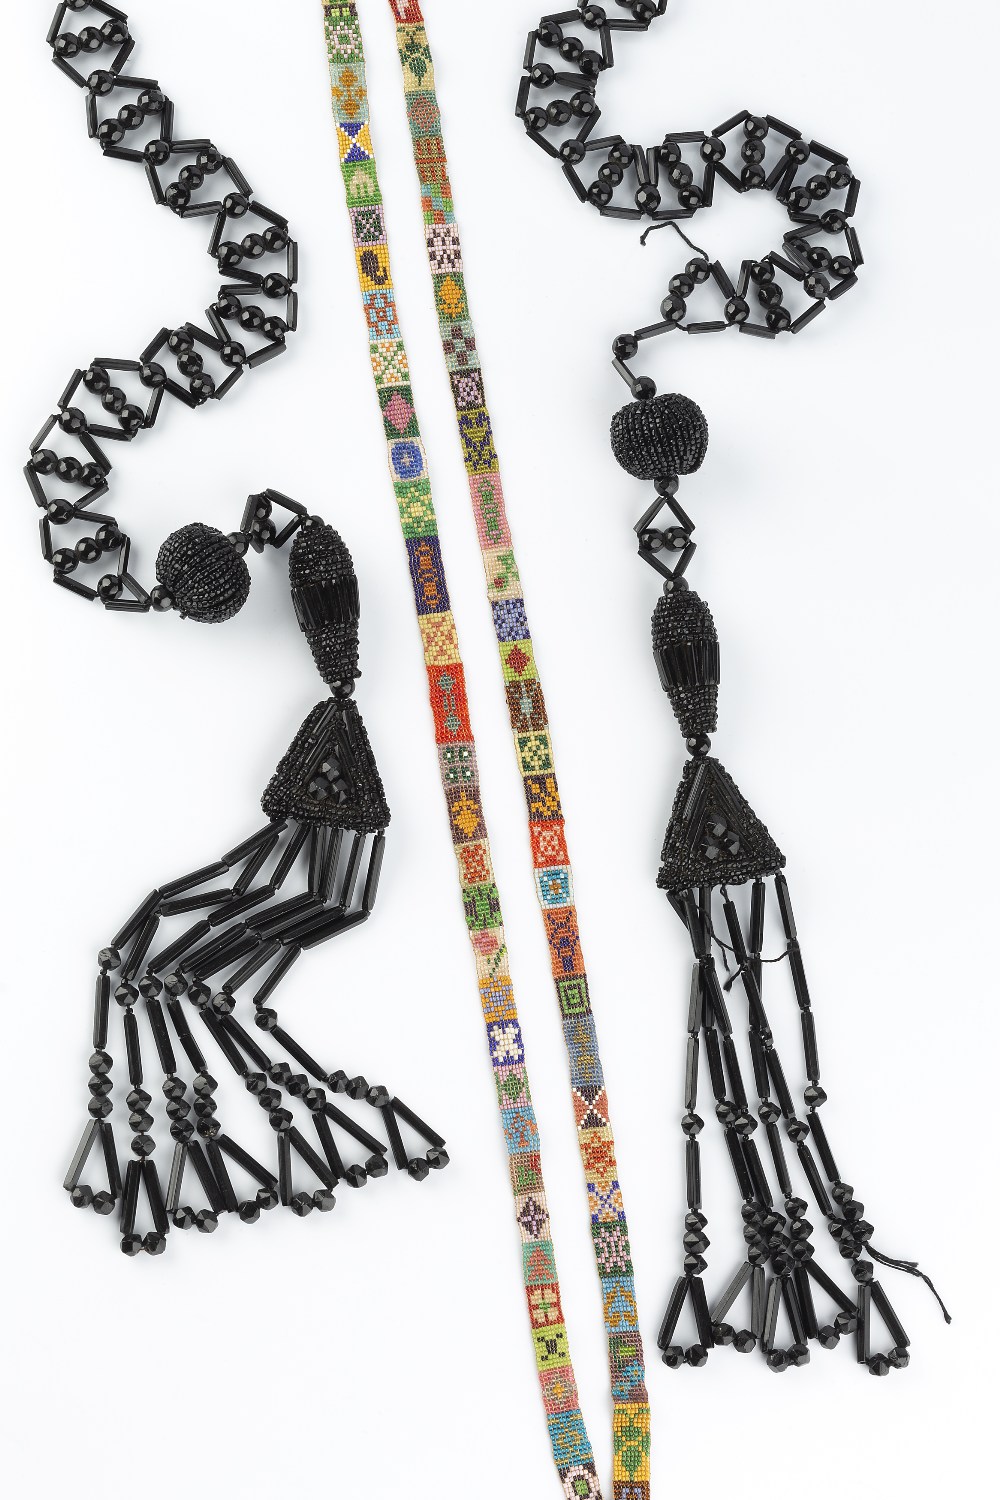 TWO BEADED SAUTOIR NECKLACES, circa 1920-30, the first a black beaded necklace with tassel drops, ( - Image 2 of 4